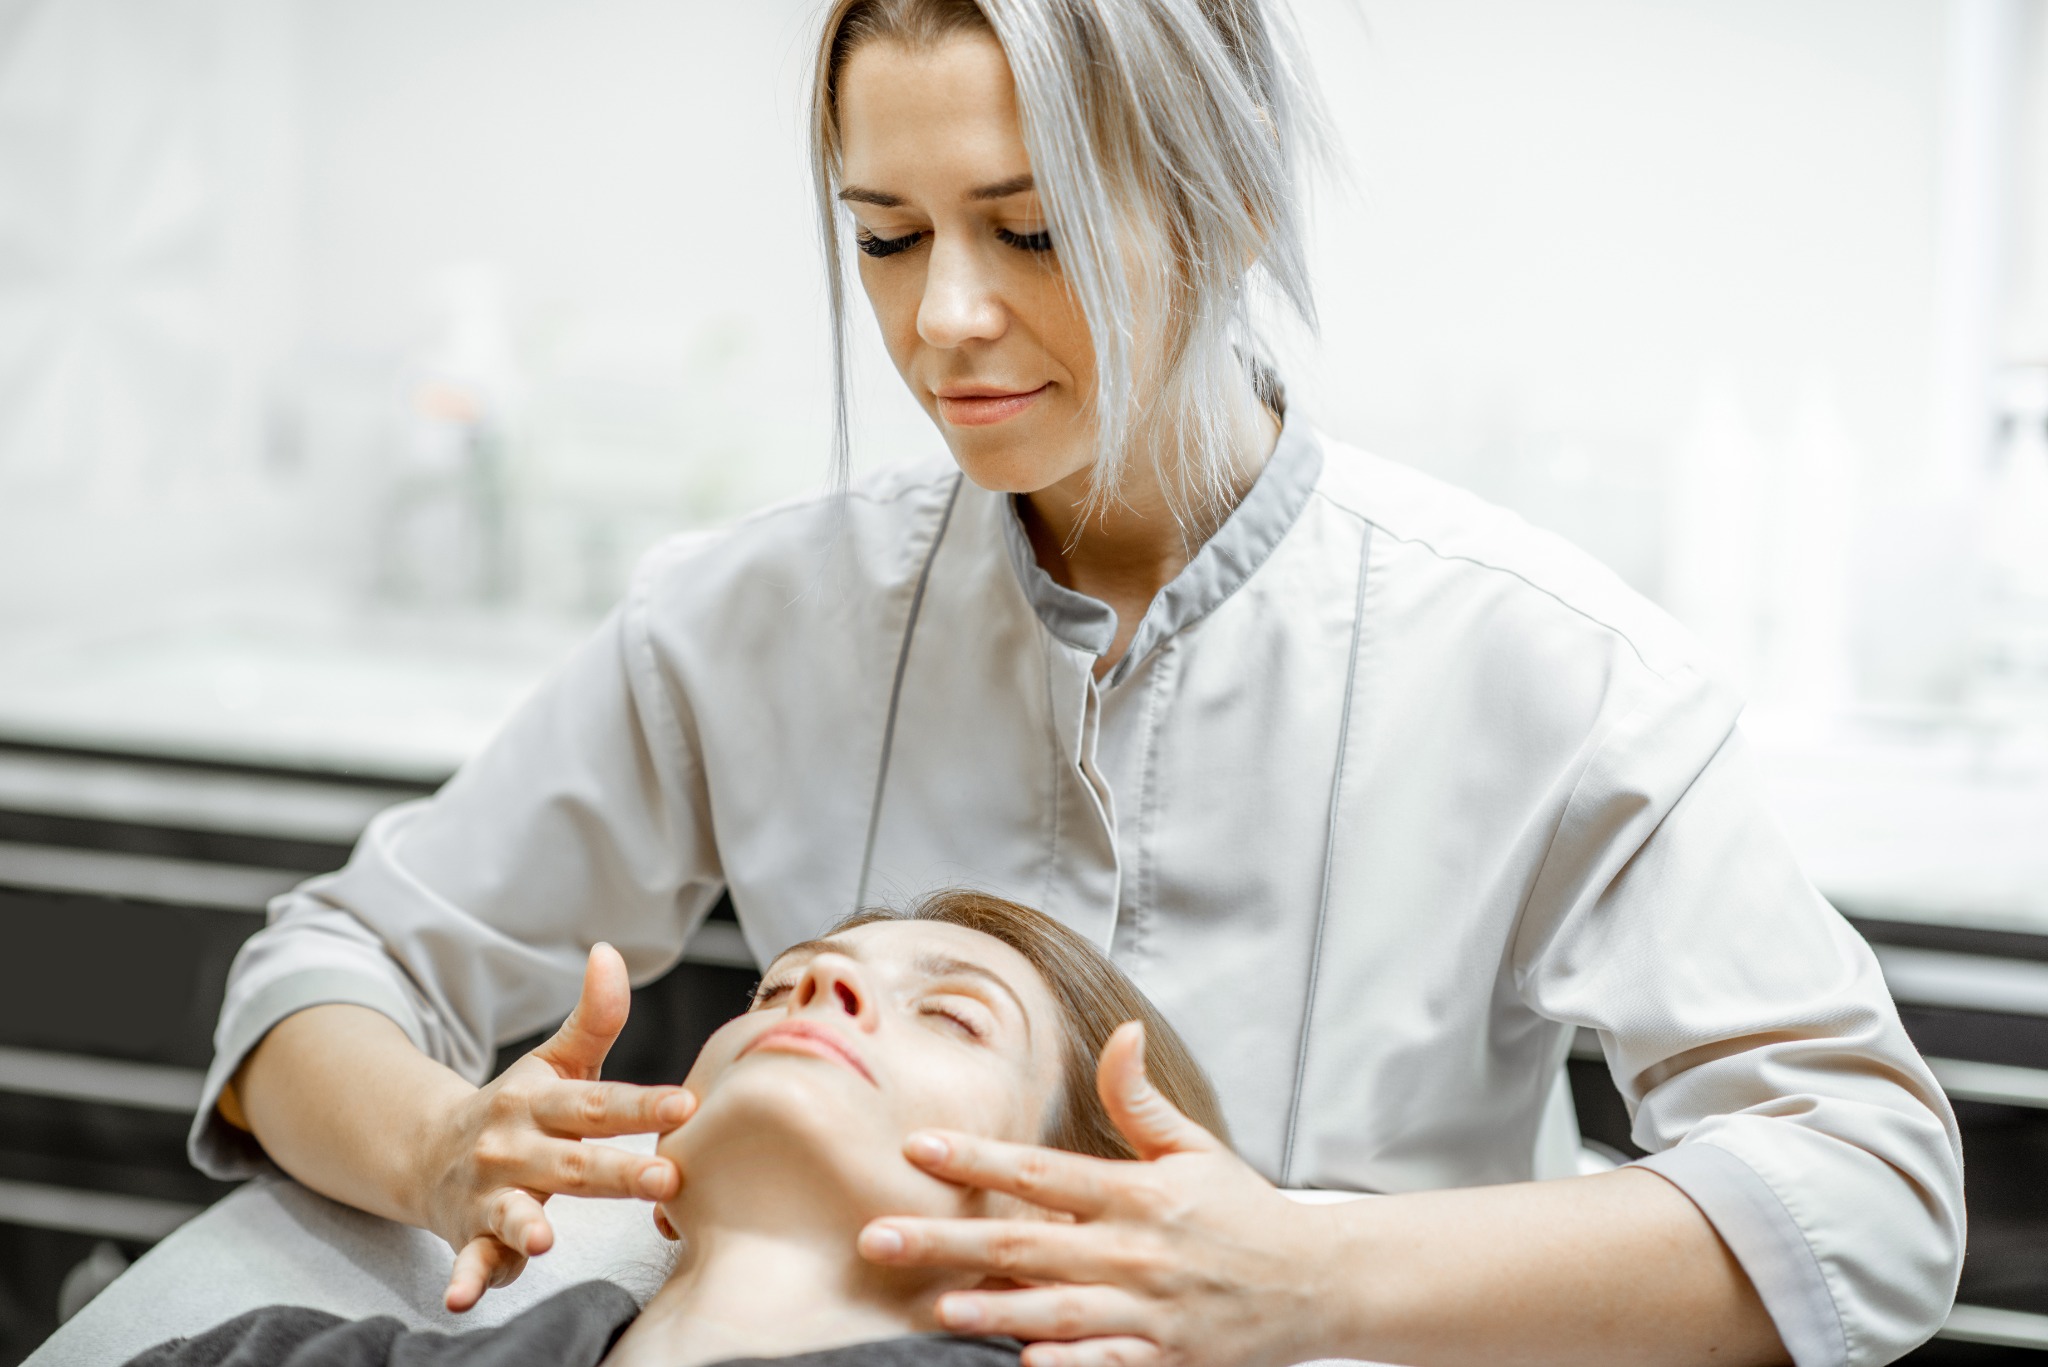 Image of a female massage therapist finishing a facial massage on a client